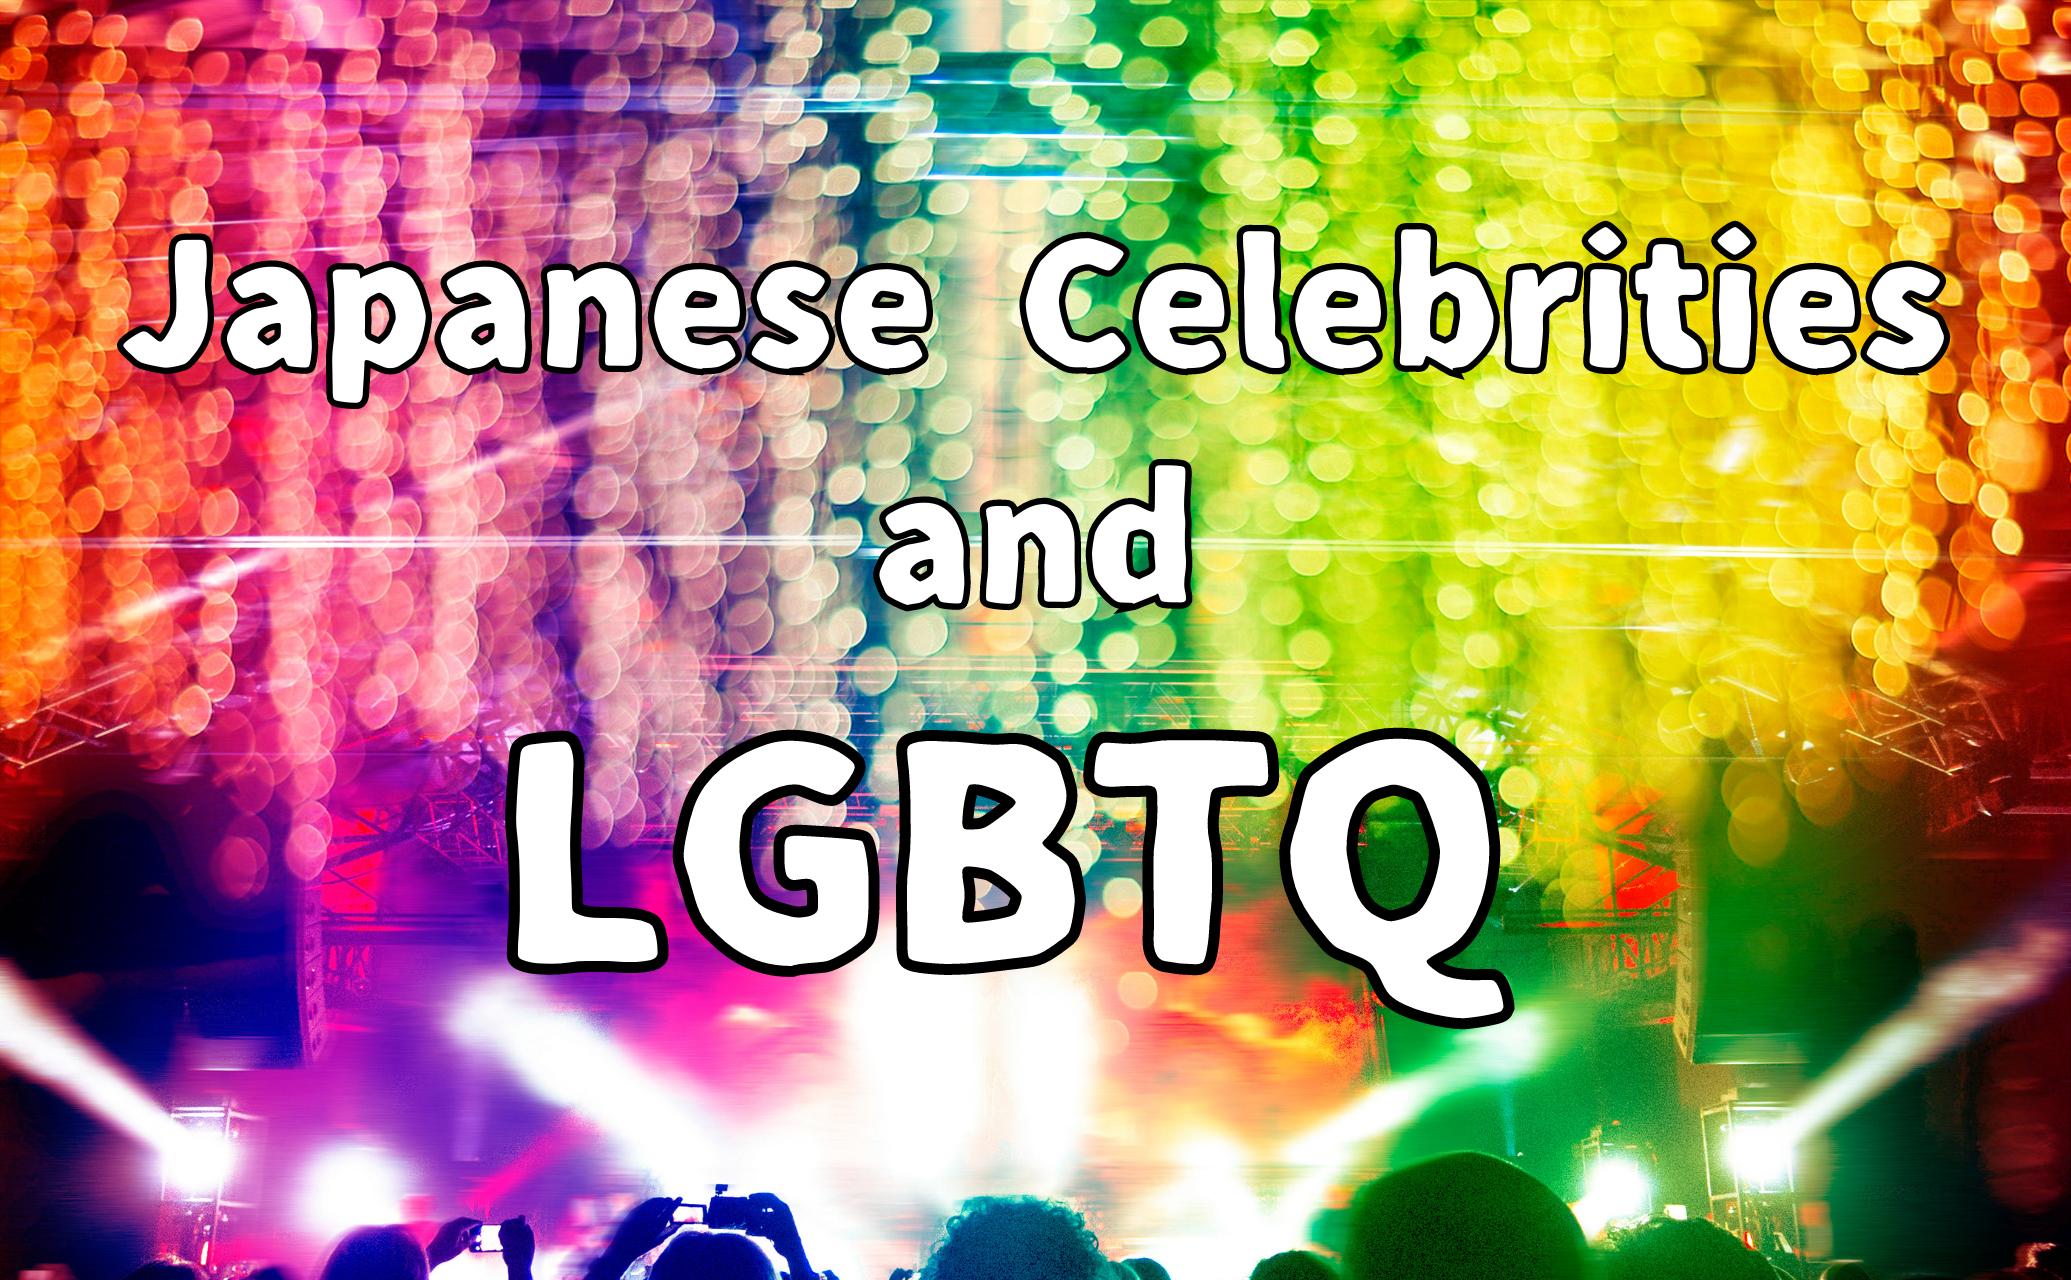 Japanese Celebrities and LGBTQ